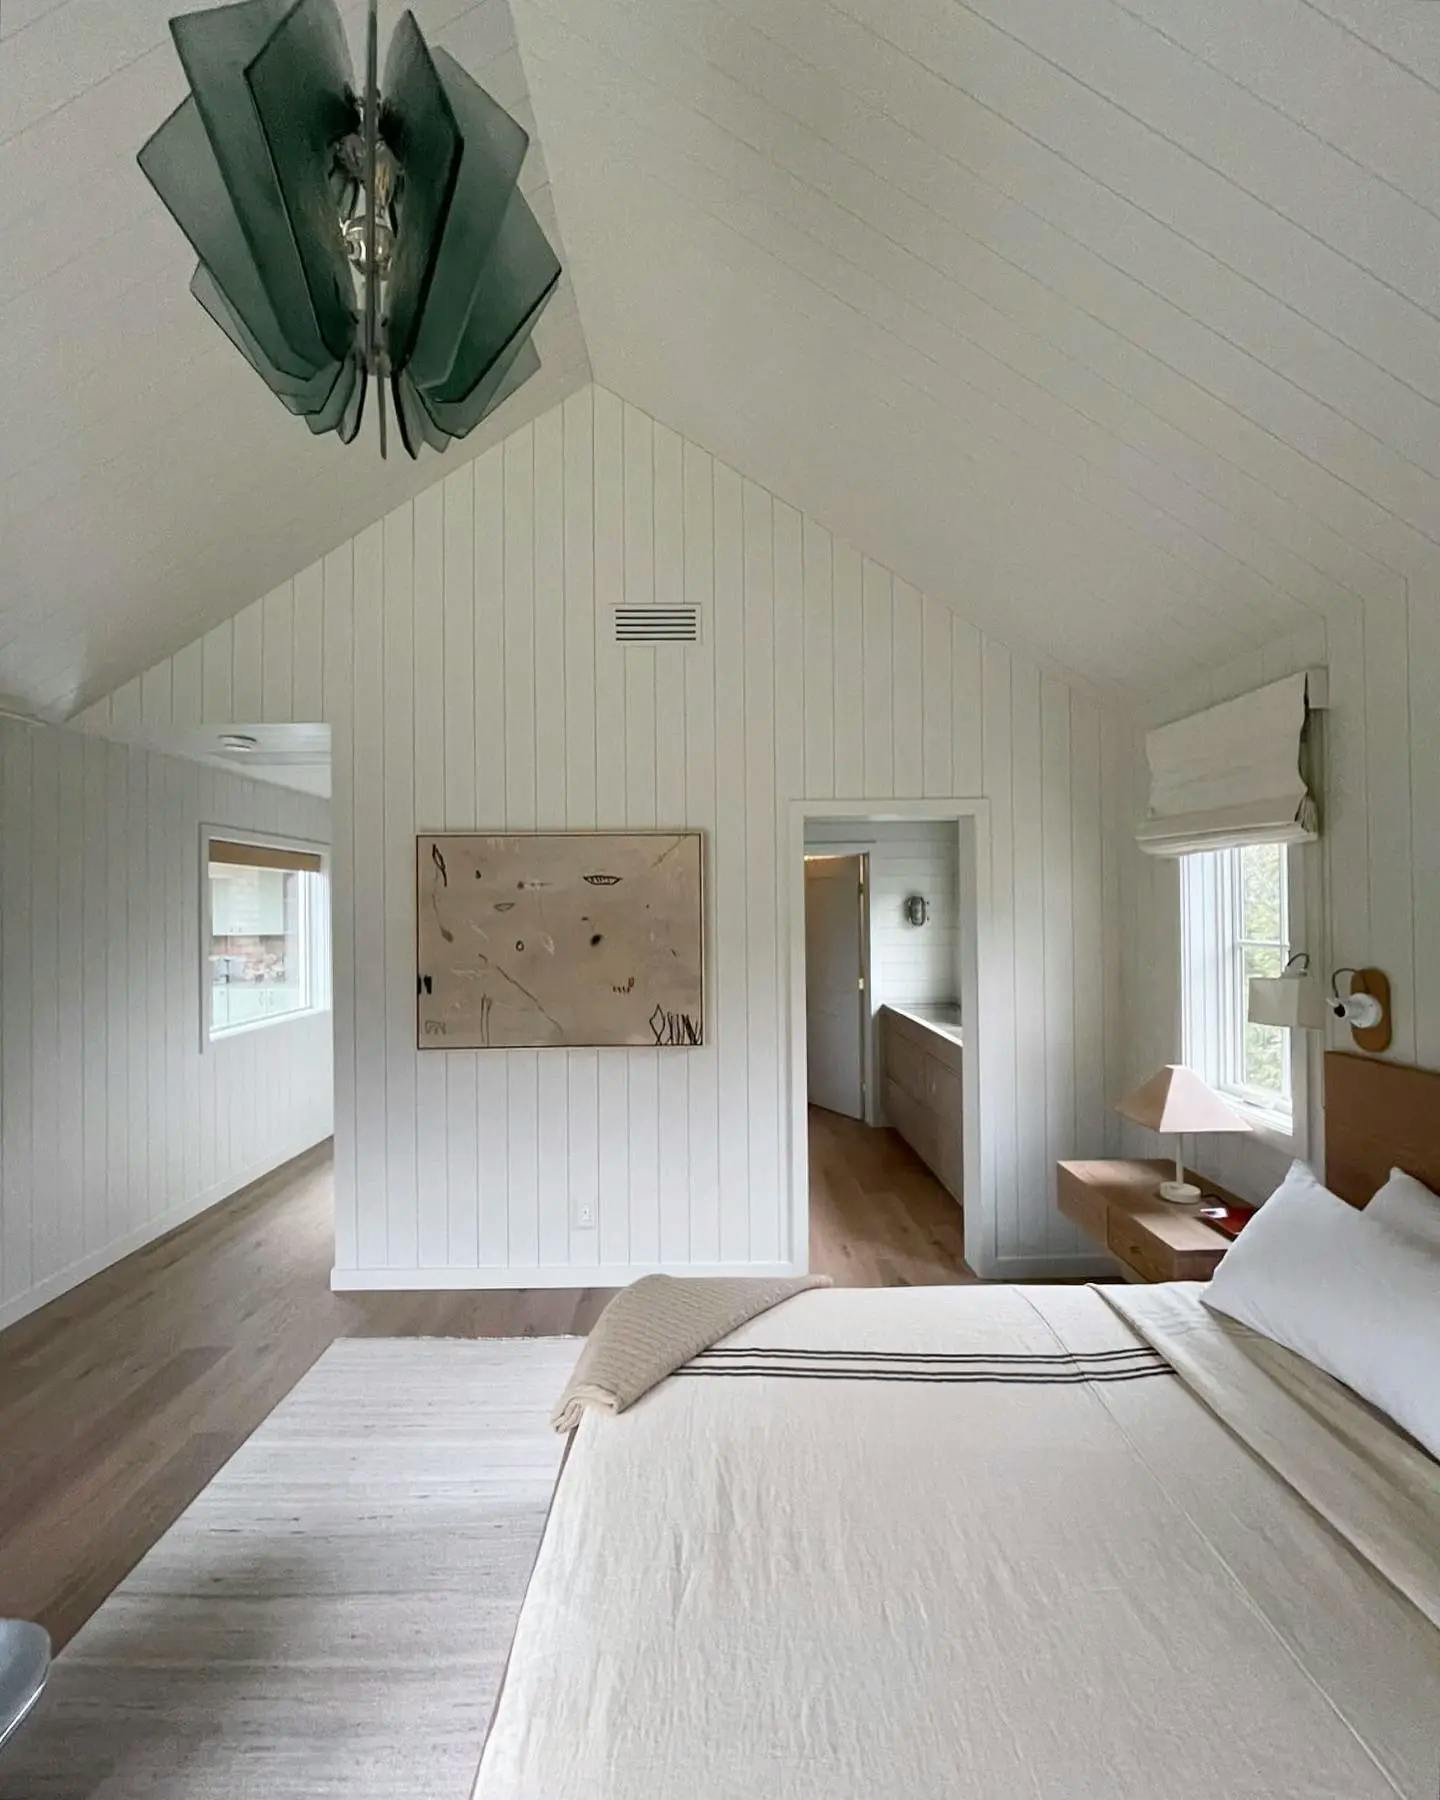 A distressed painting by artist Saxon Quinn in a neutral bedroom with vaulted ceilings.